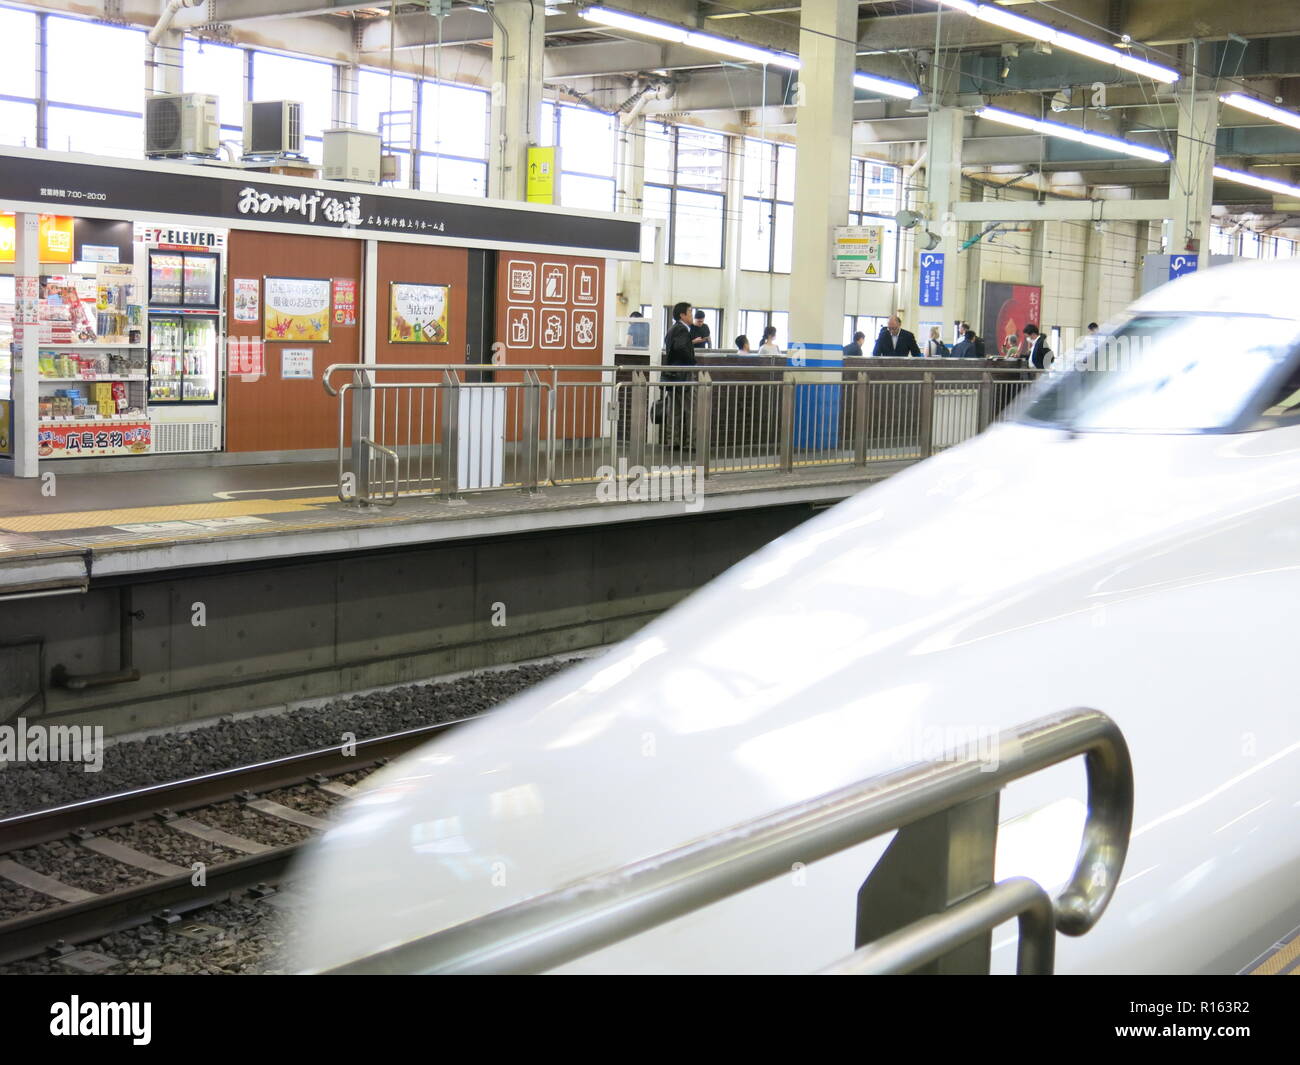 The white pointed nose of Japan's Bullet train is an iconic sight as it rushes through the station Stock Photo